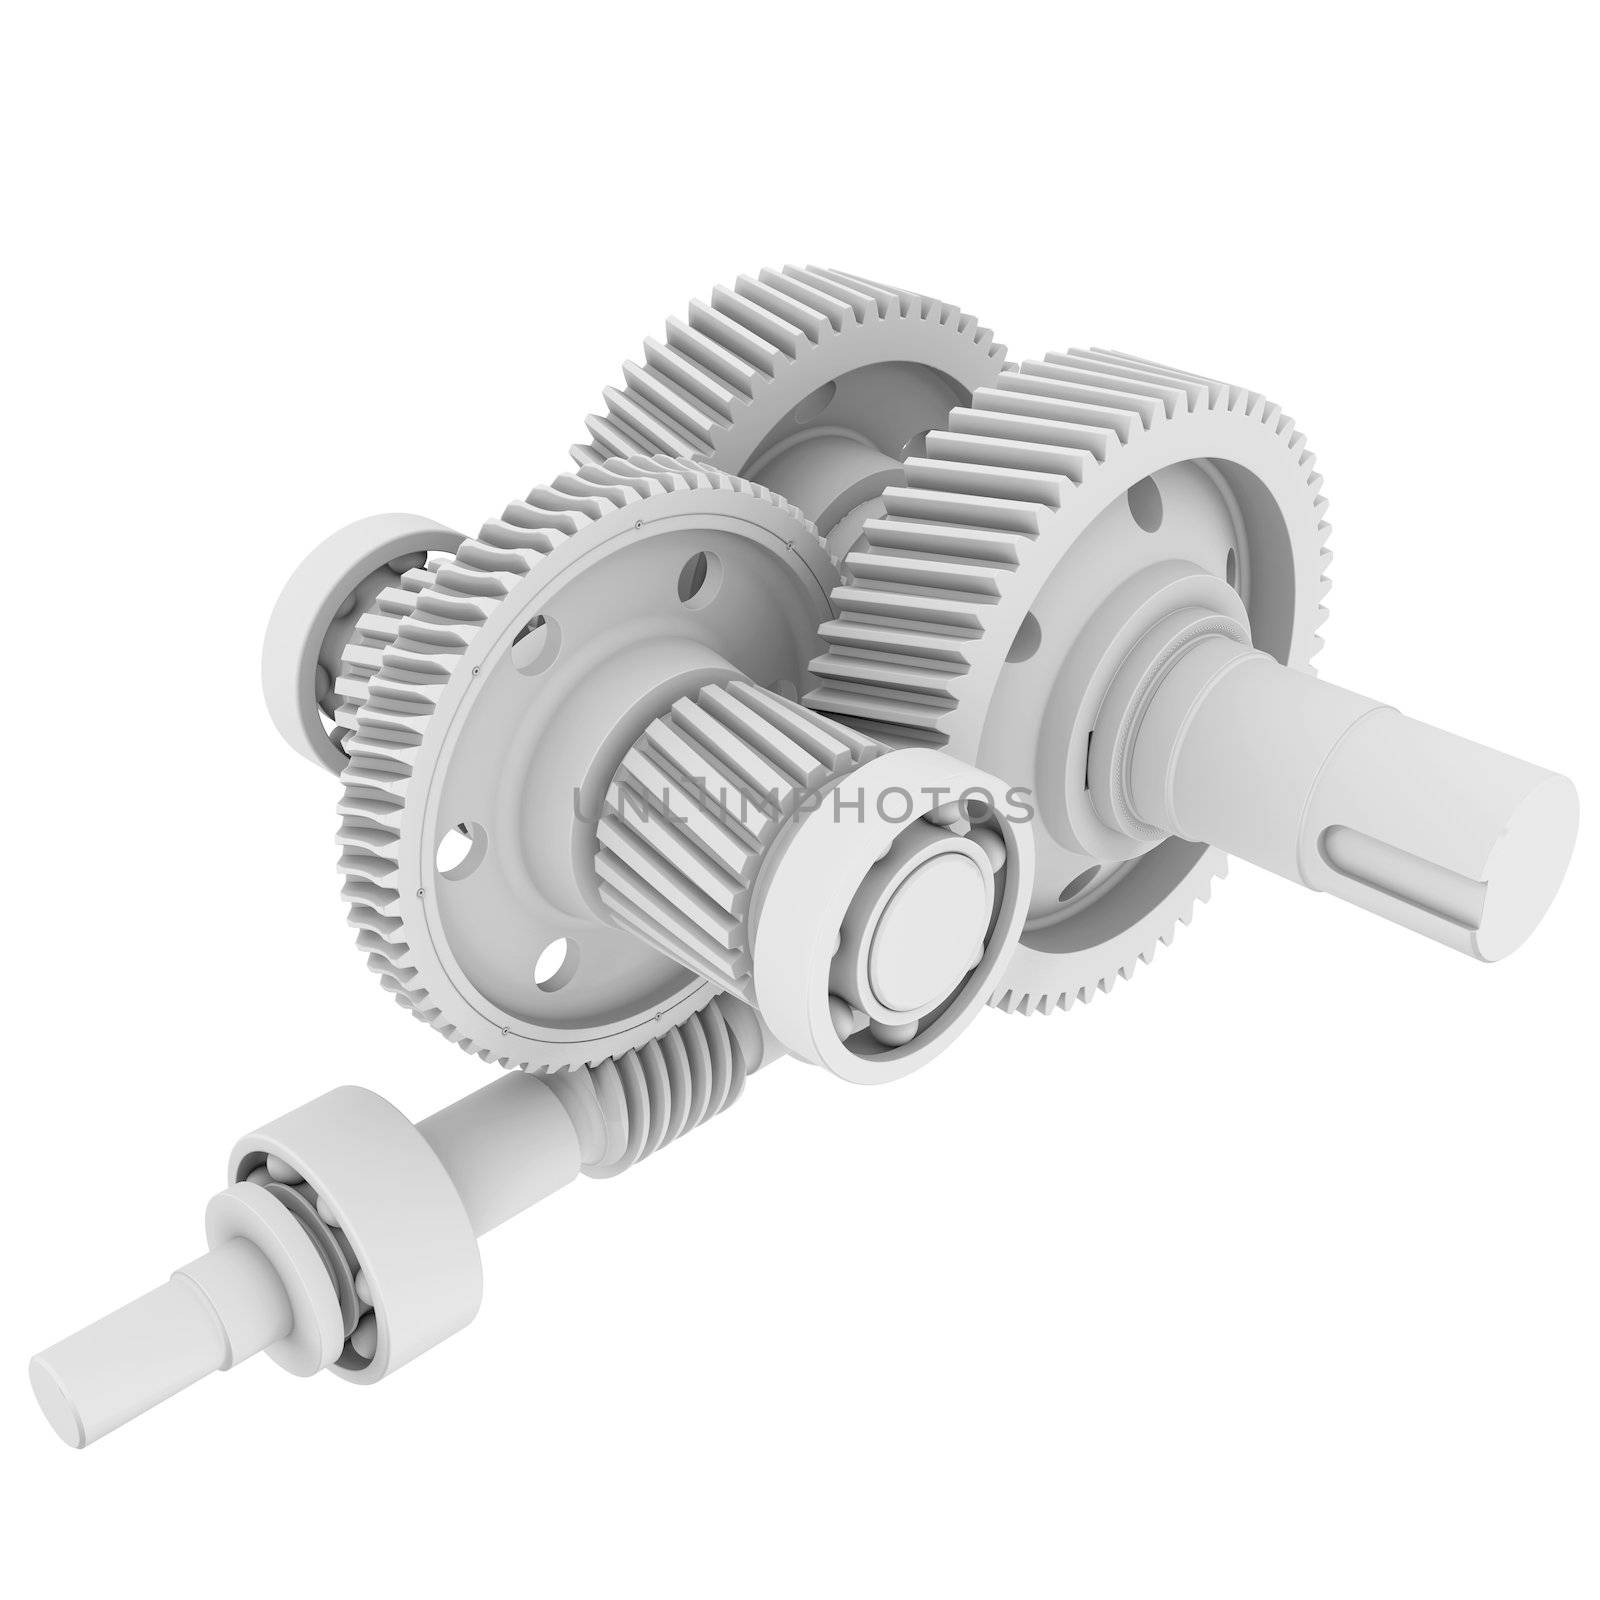 White shafts, gears and bearings. 3d render isolated on white background